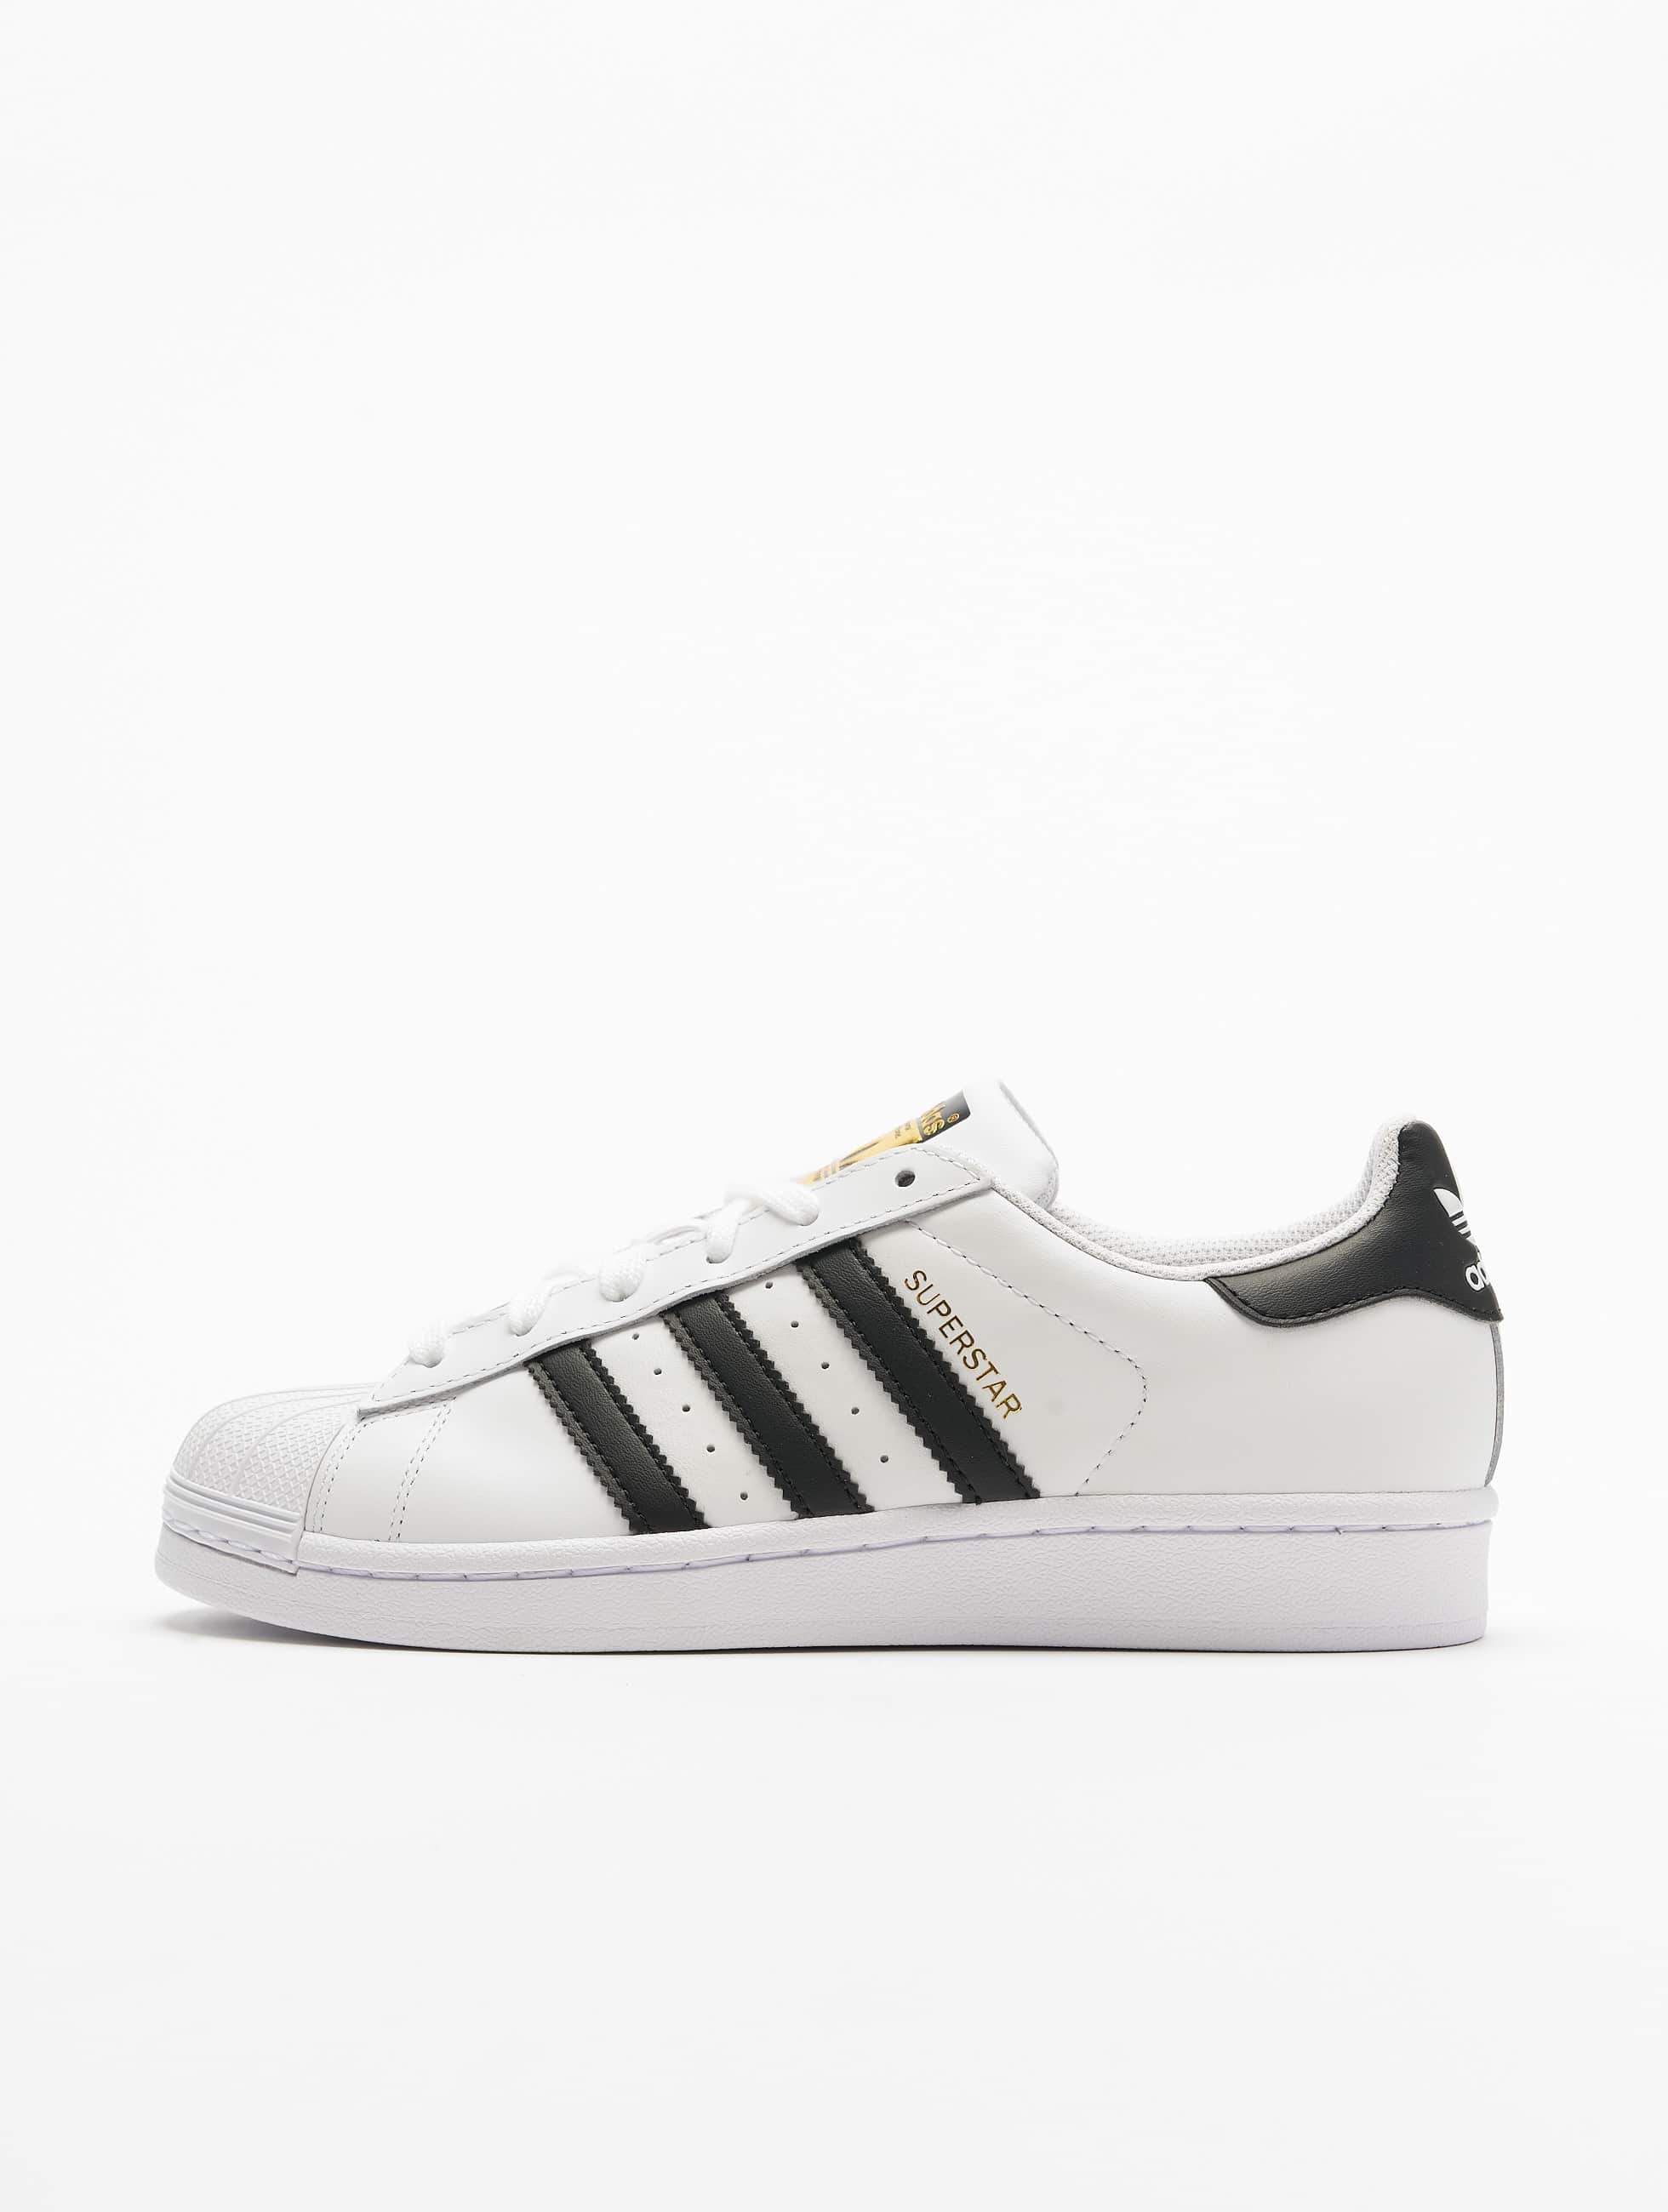 Celebrating 50 Years of the adidas Superstar